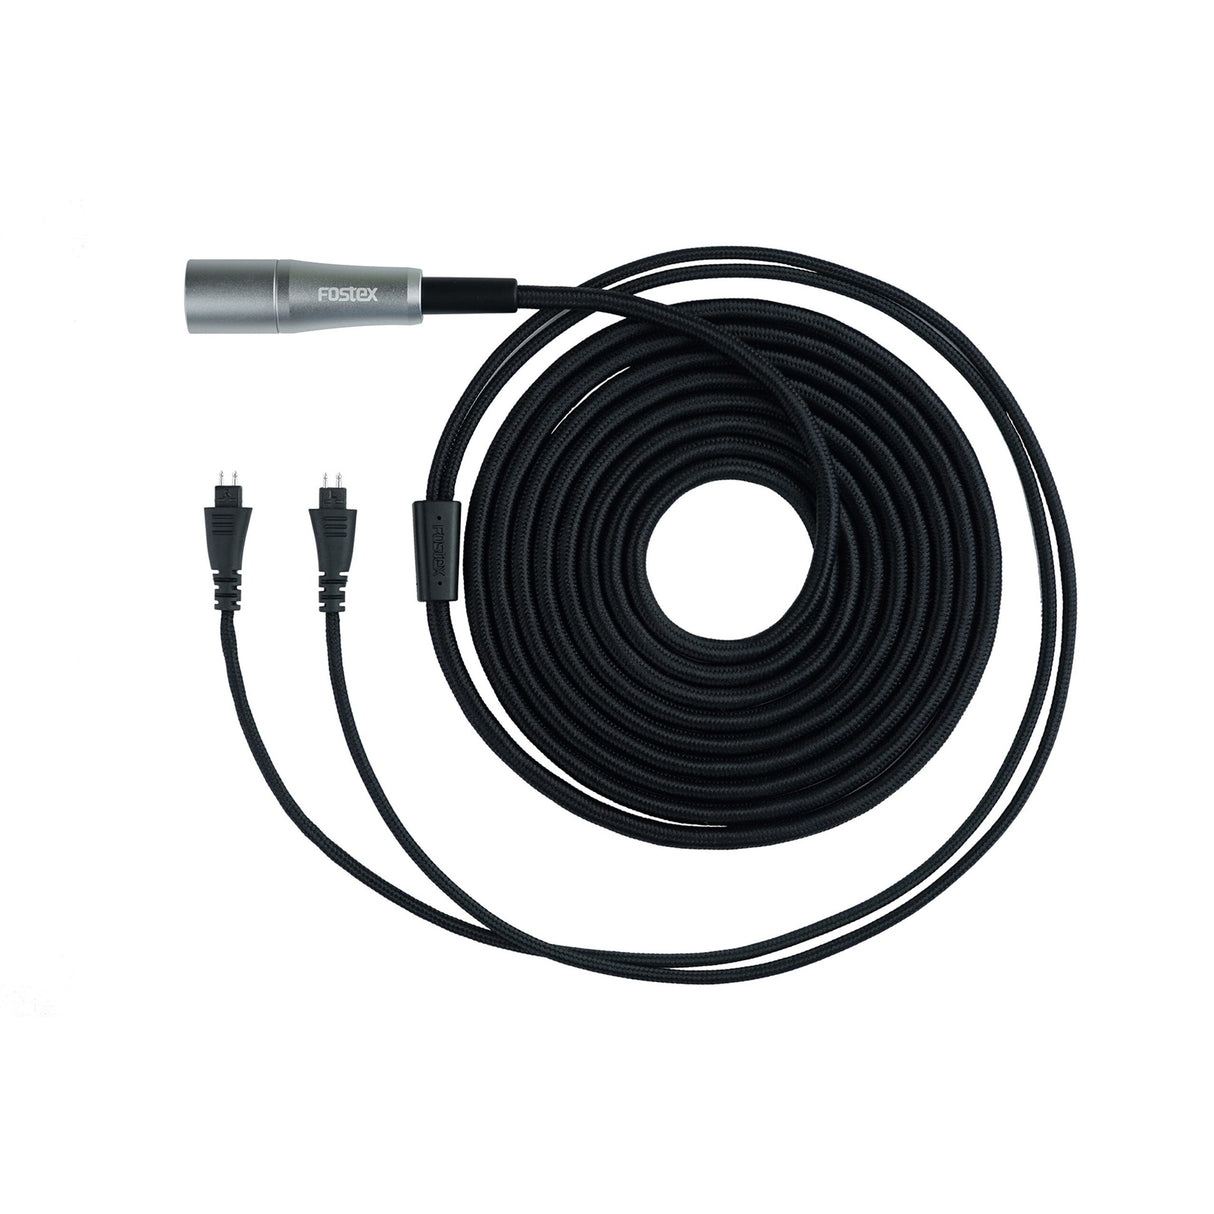 Fostex ET-H30N7BL Balanced Cable for TH-900mk2